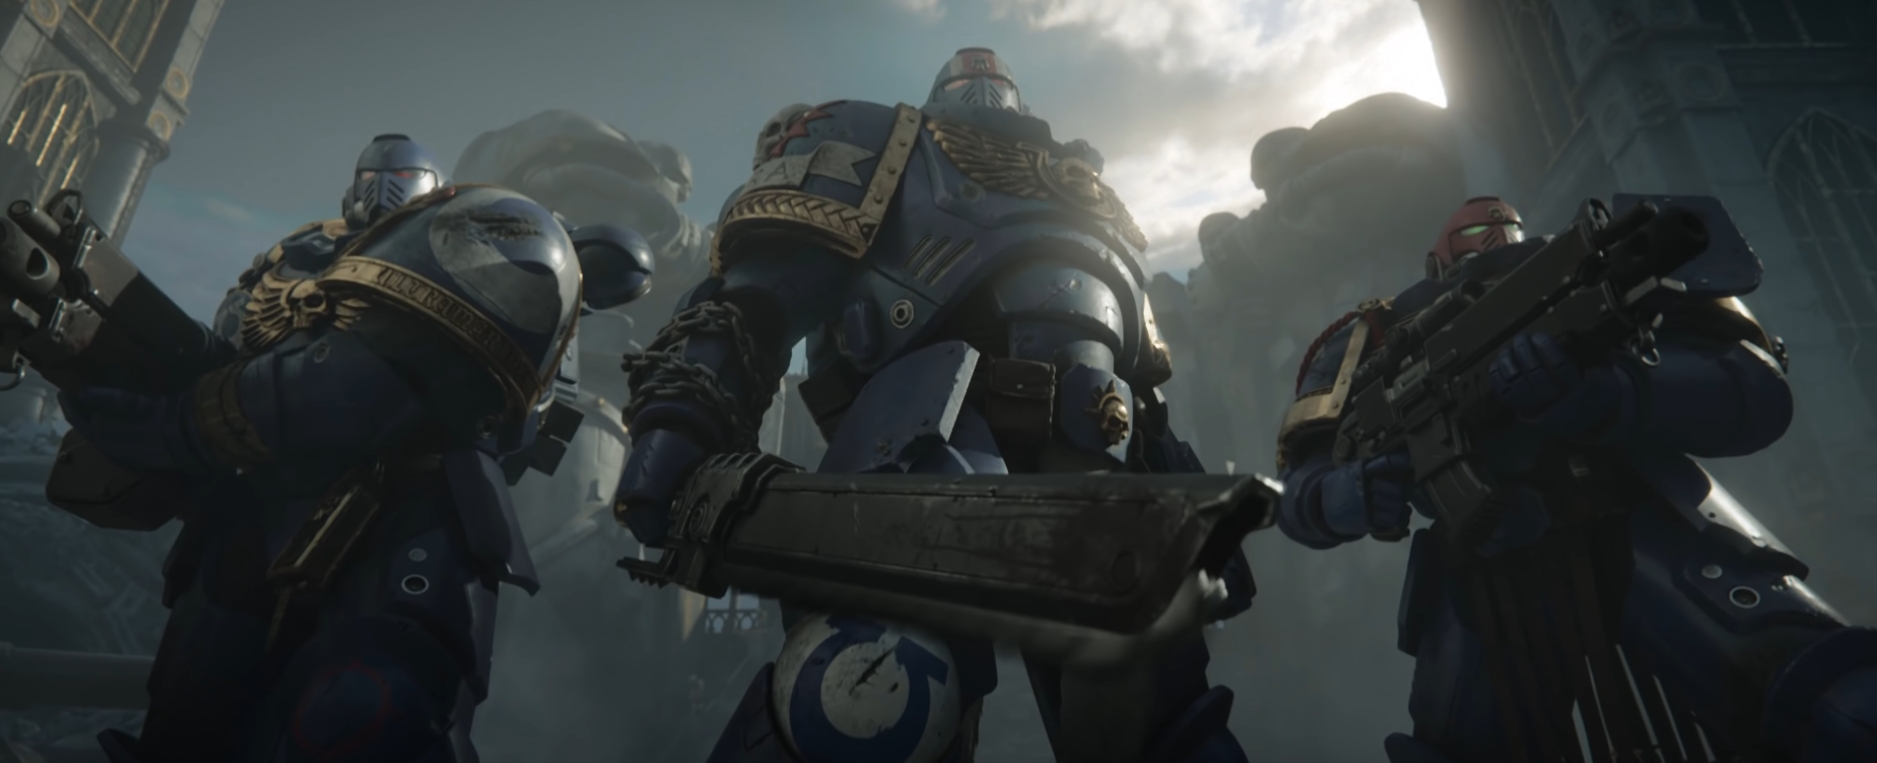 Space Marines 2 Release Date 